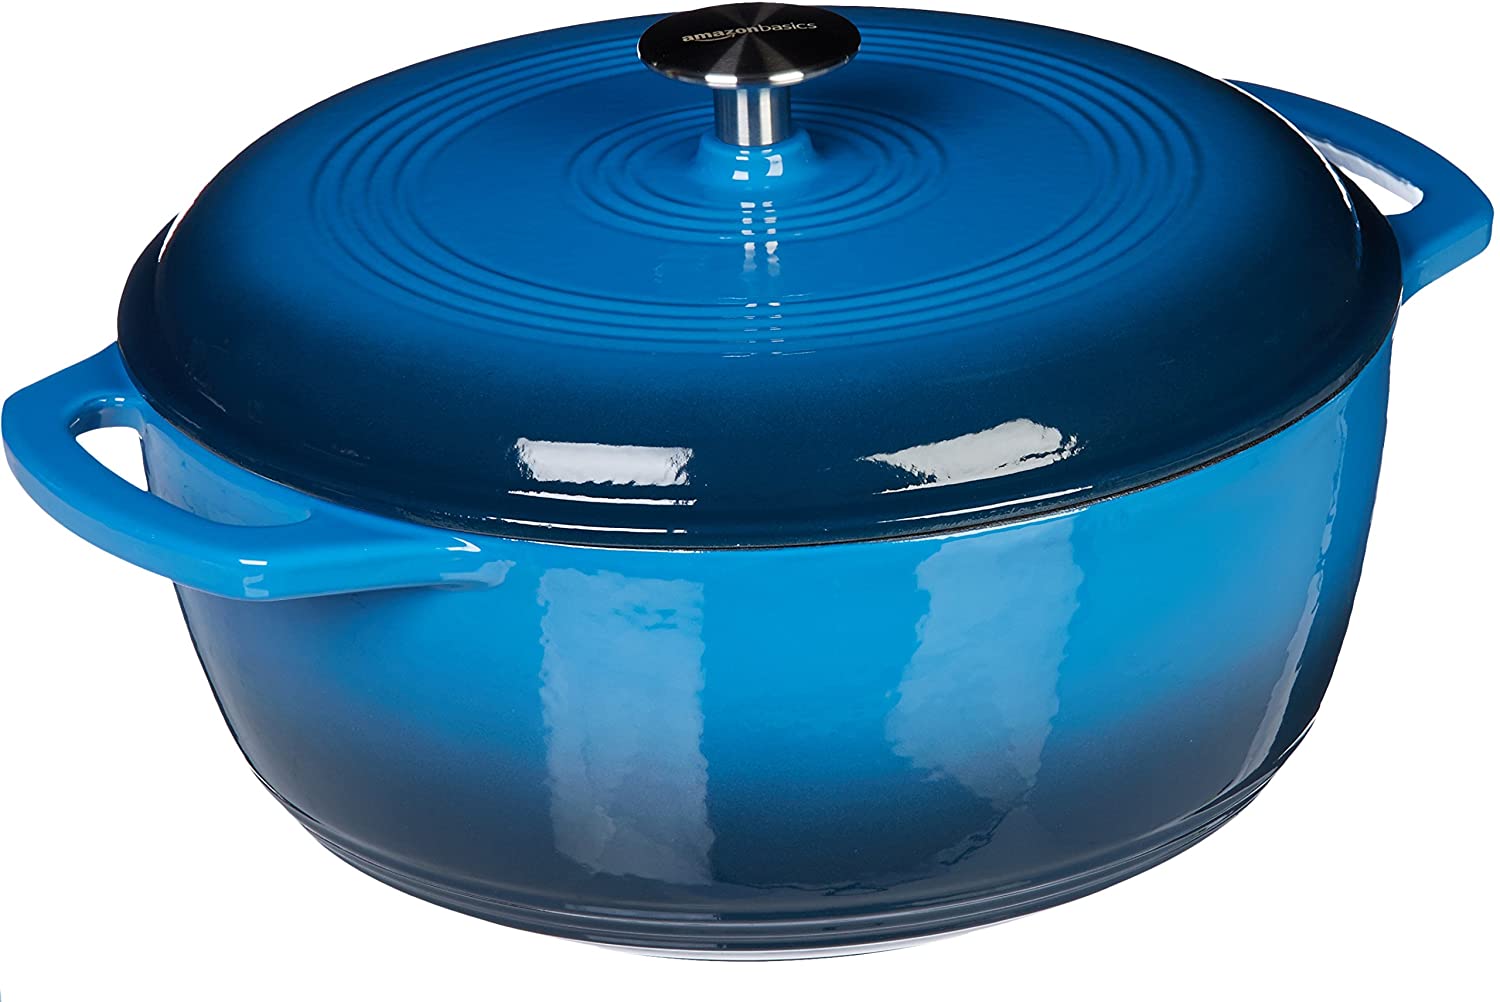 Deep Frying Equipment like this Blue Enameled Cast Iron Dutch Oven